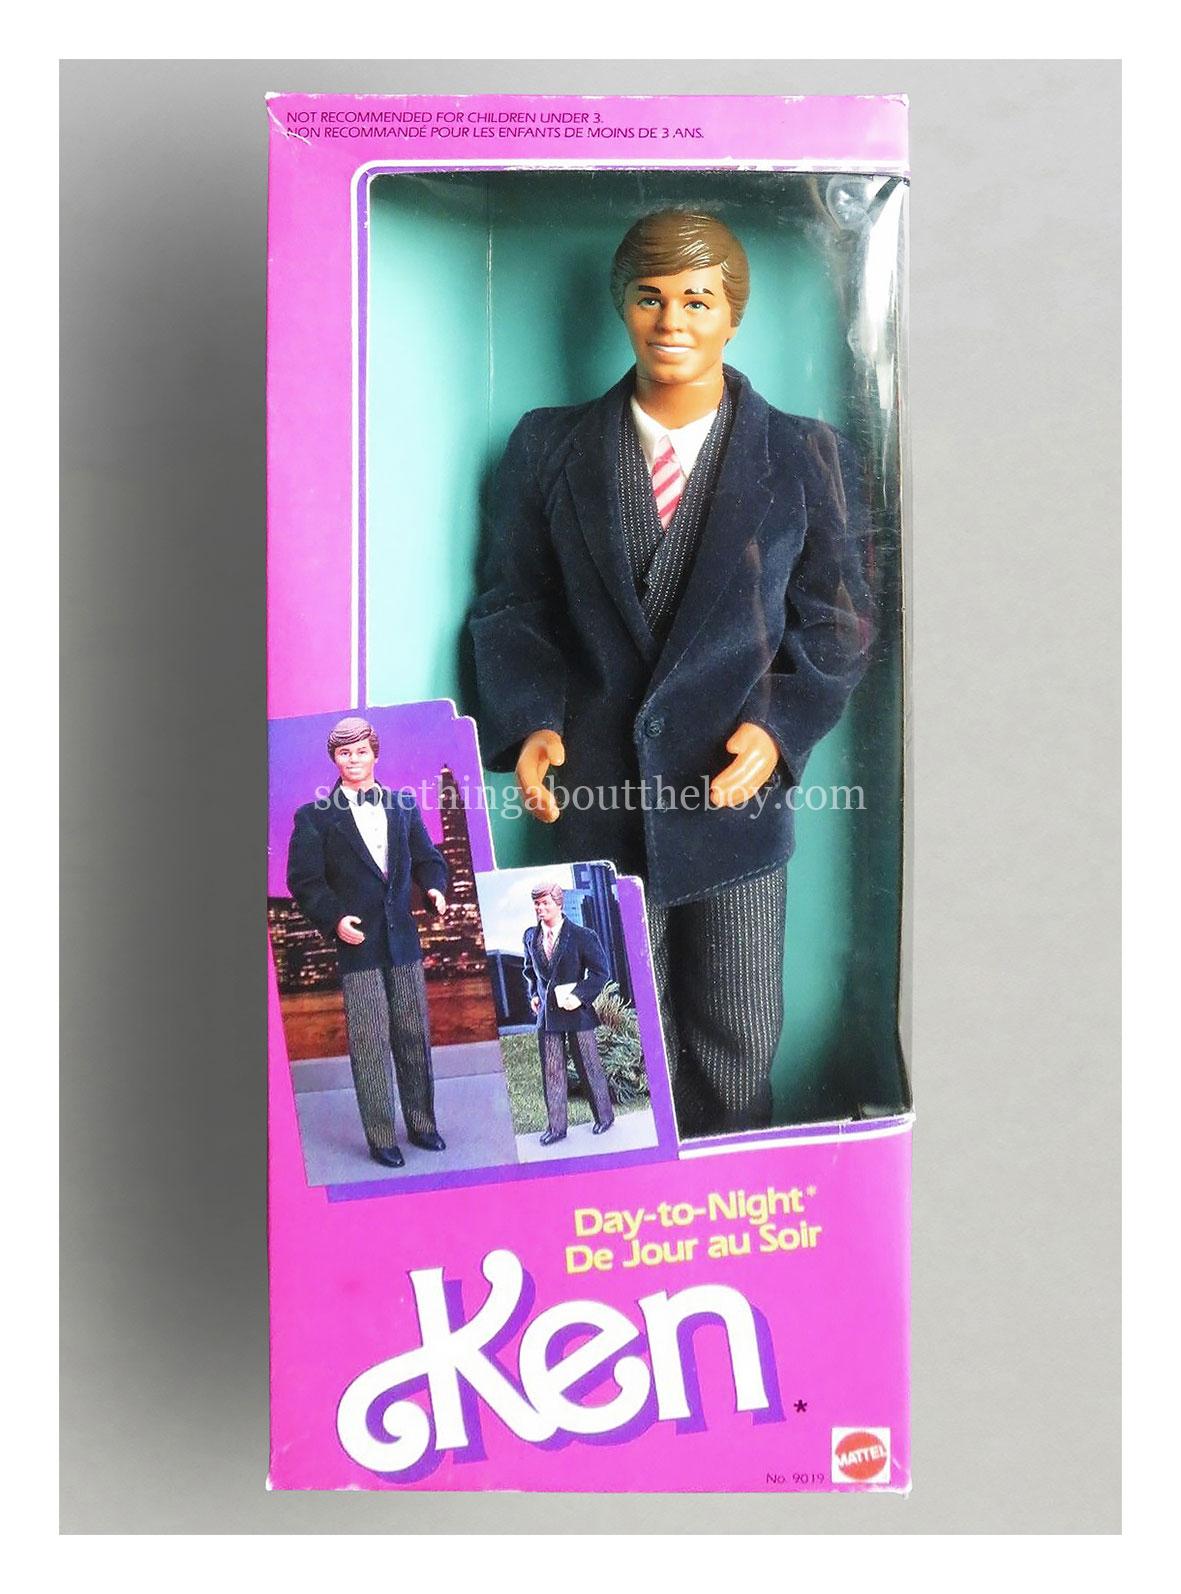 1985 #9019 Day-to-Night Ken in Canadian packaging